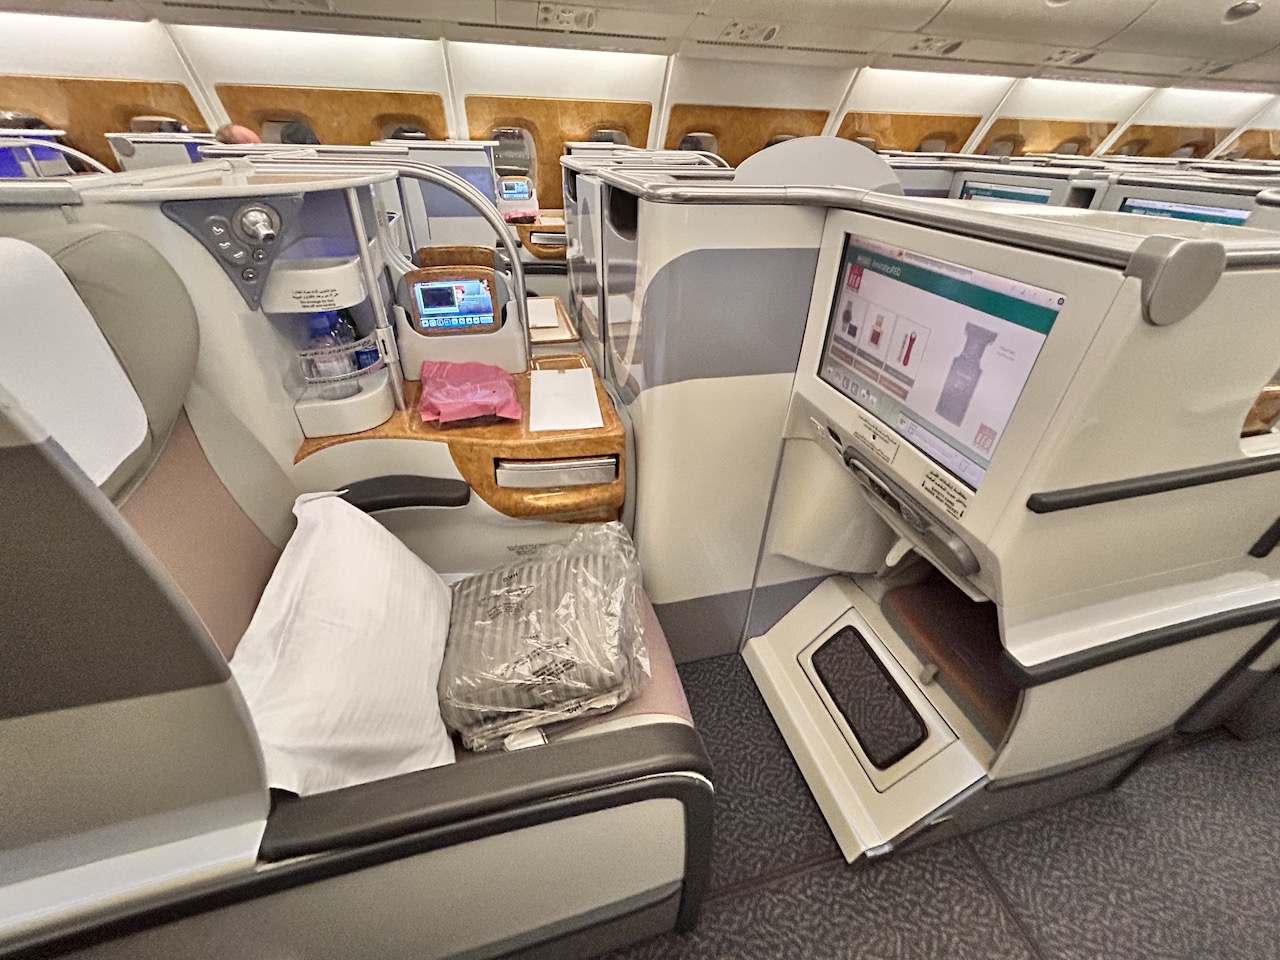 Emirates breathed new life into the business class experience with its first A380s and today it continues to thrill luxury travellers from across Asia, discovers Nick Walton.